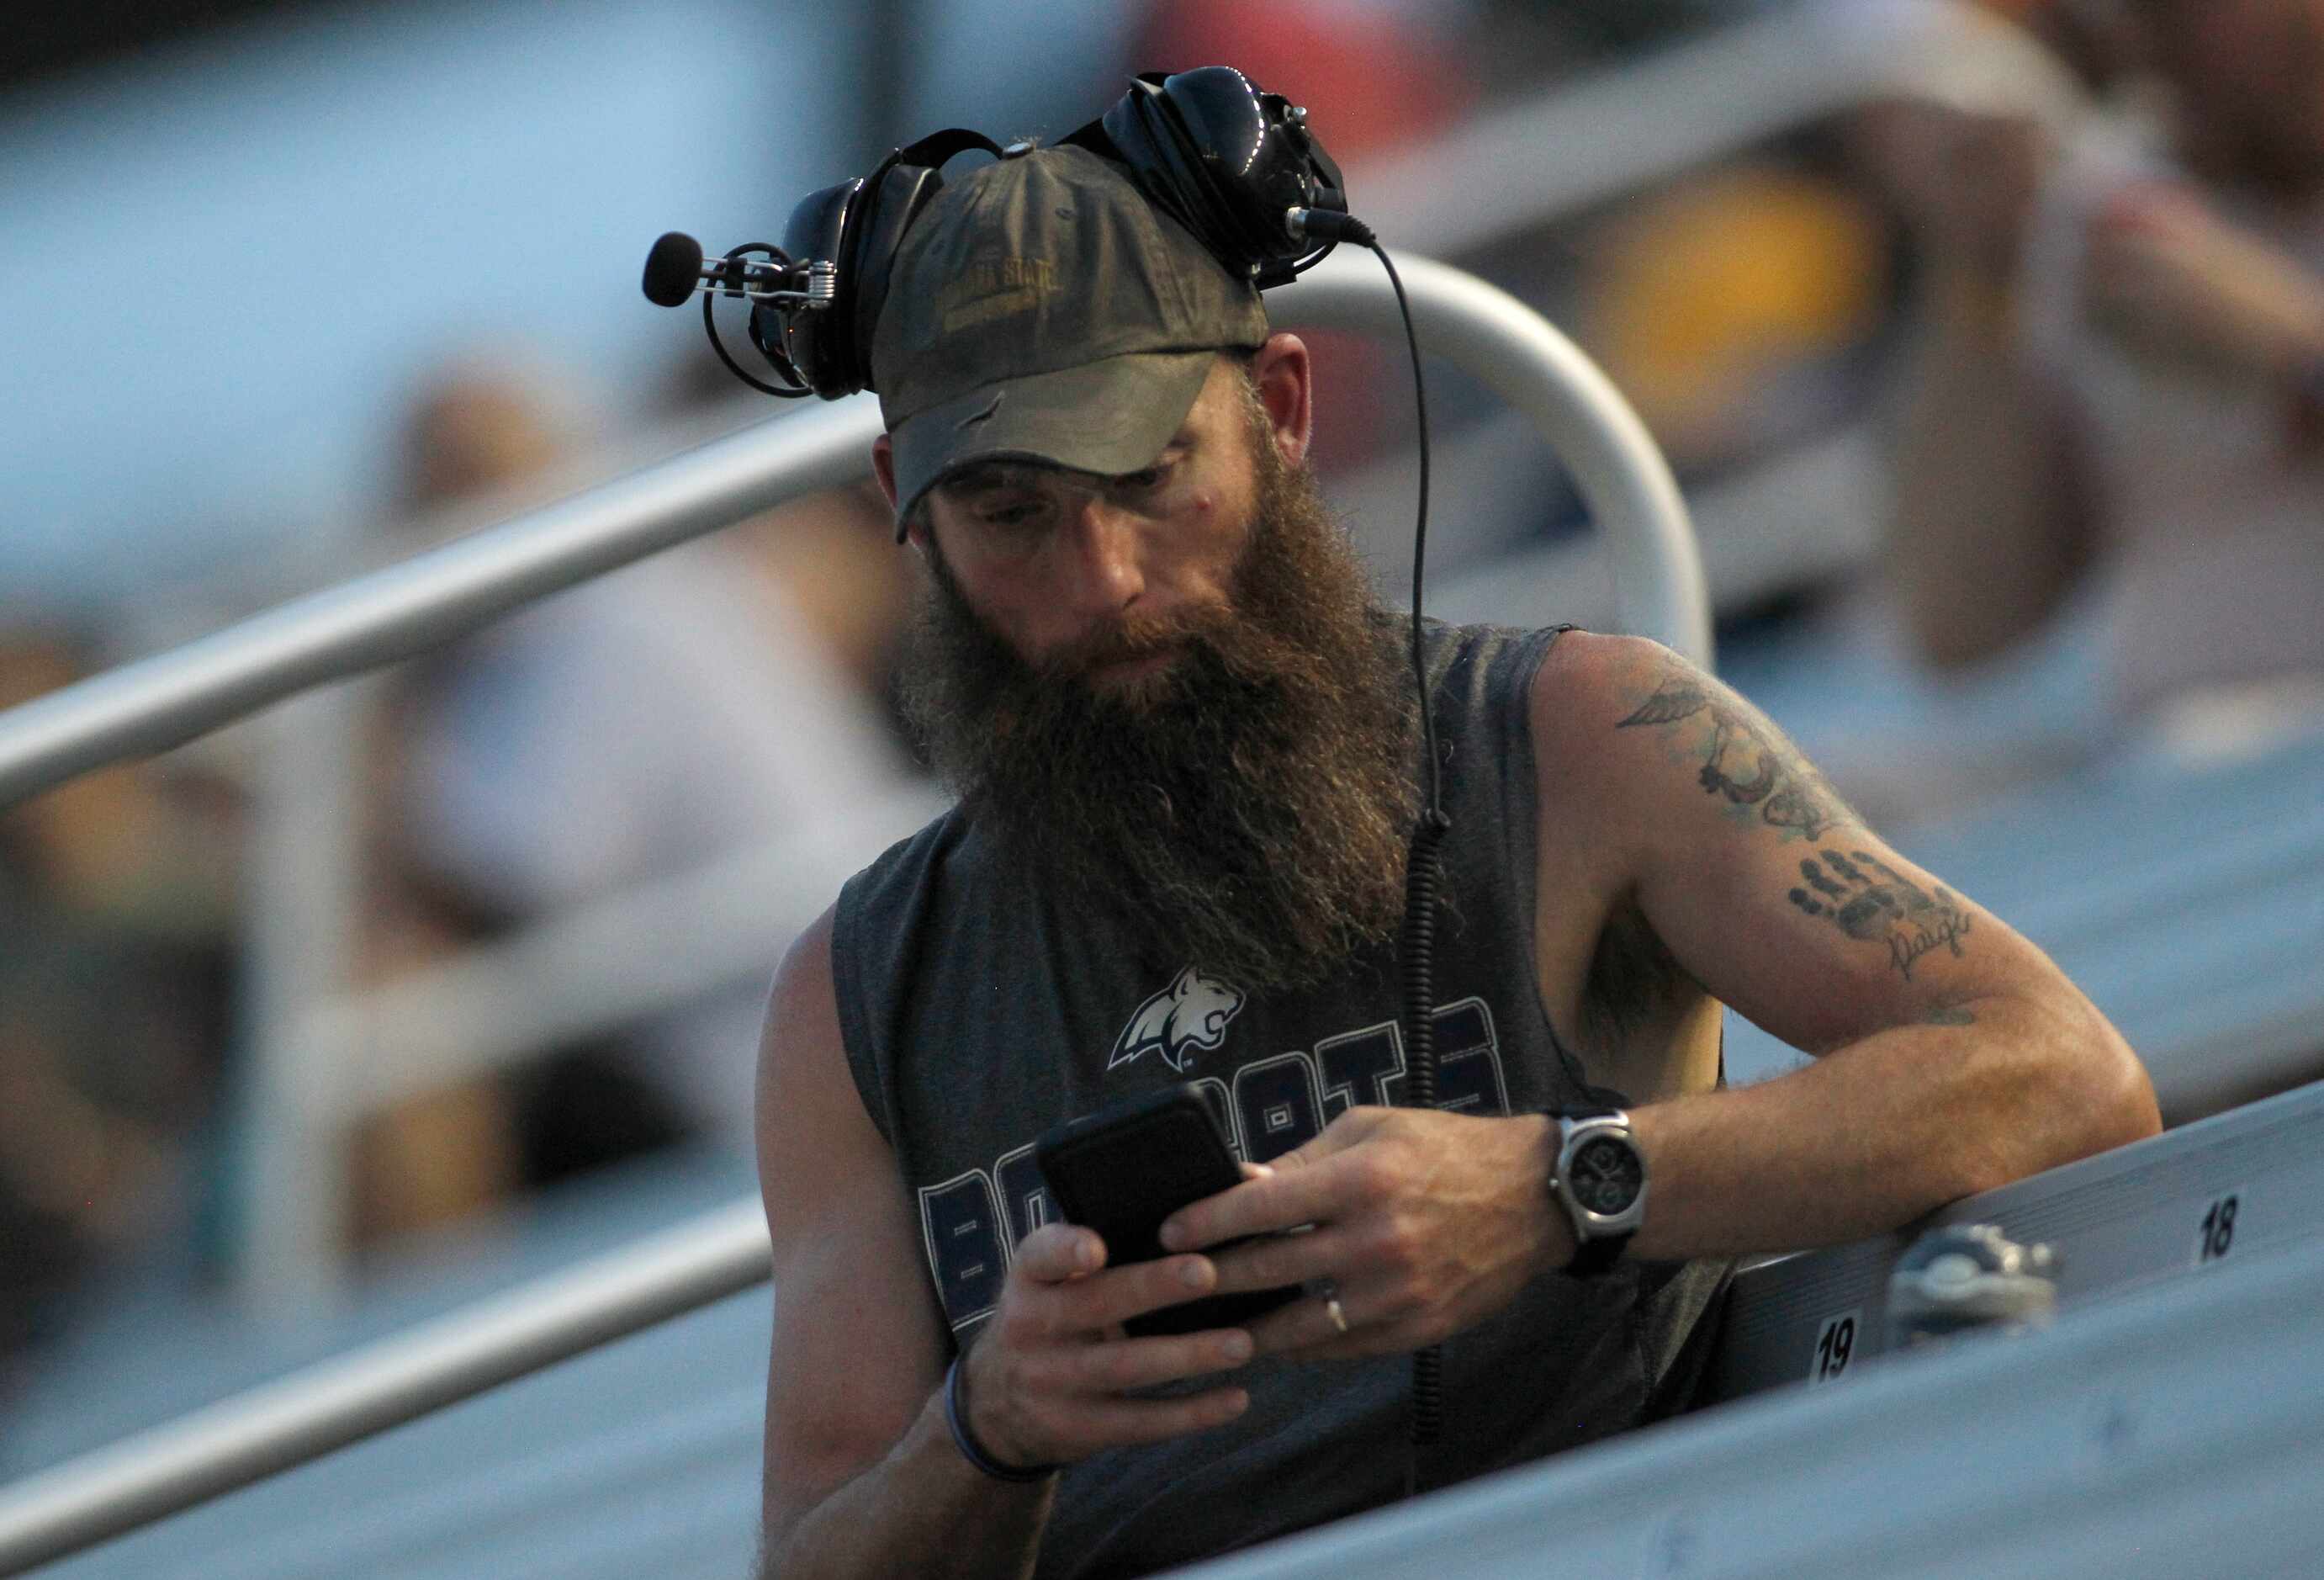 Race enthusiast Ross Krueger of Dallas takes a break to deliver a text during a caution...